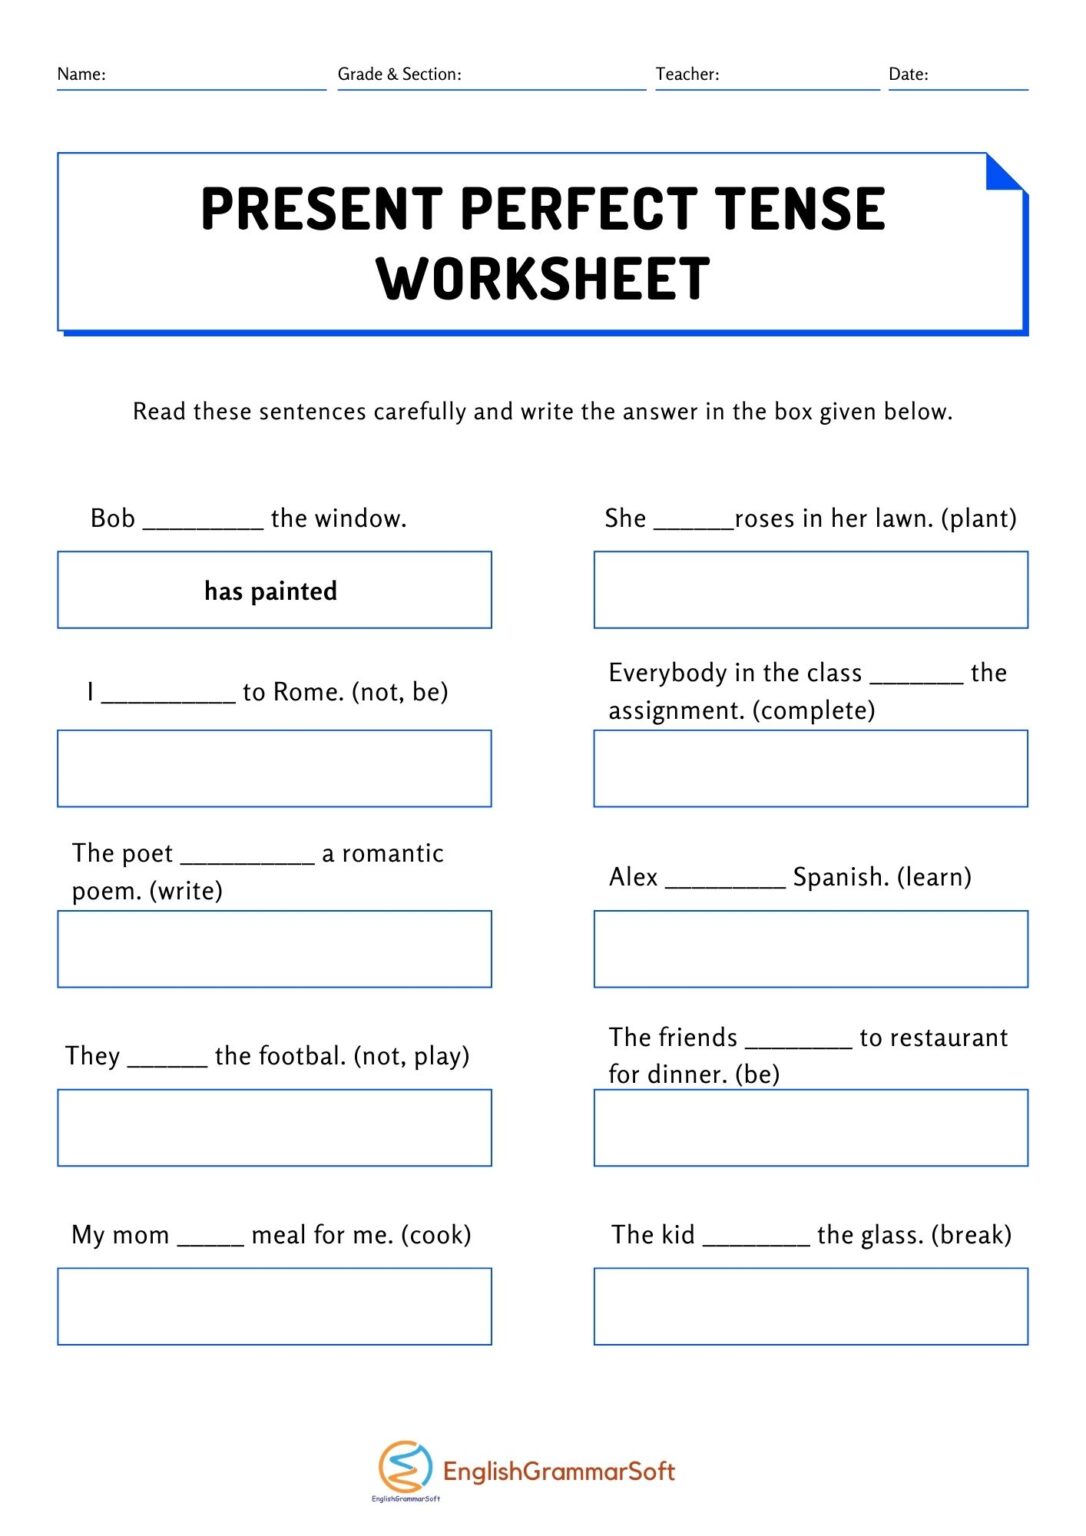 Present Perfect Tense Worksheets With Answers EnglishGrammarSoft